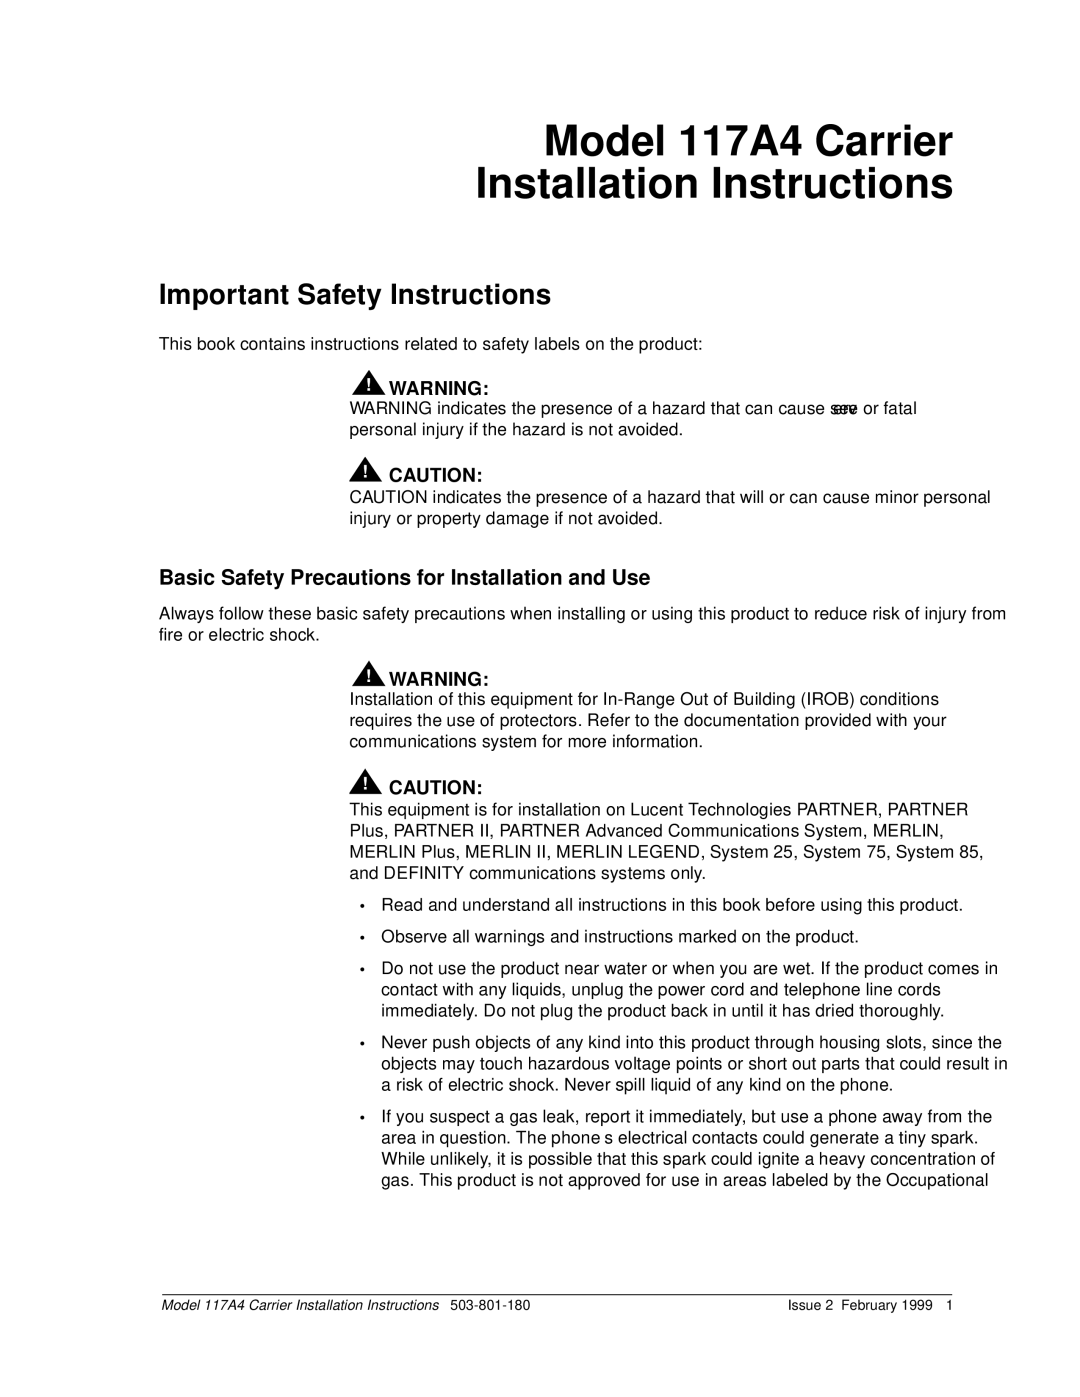 Lucent Technologies Model 117A4 Carrier Installation Instructions, Basic Safety Precautions for Installation and Use 